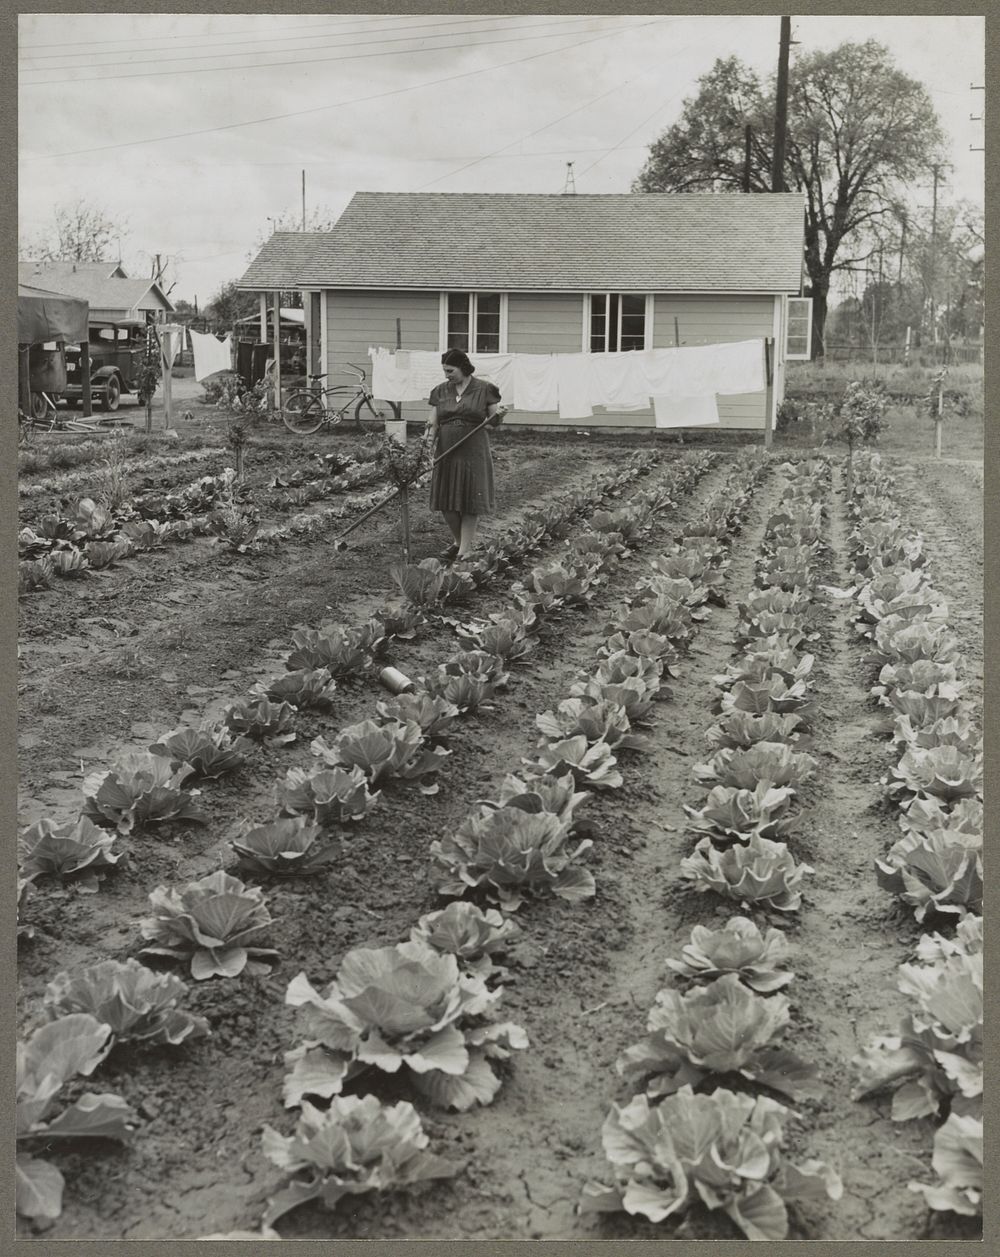 Gardens at labor homes add to incomes. Tulare migrant camp. Visalia, California. Sourced from the Library of Congress.